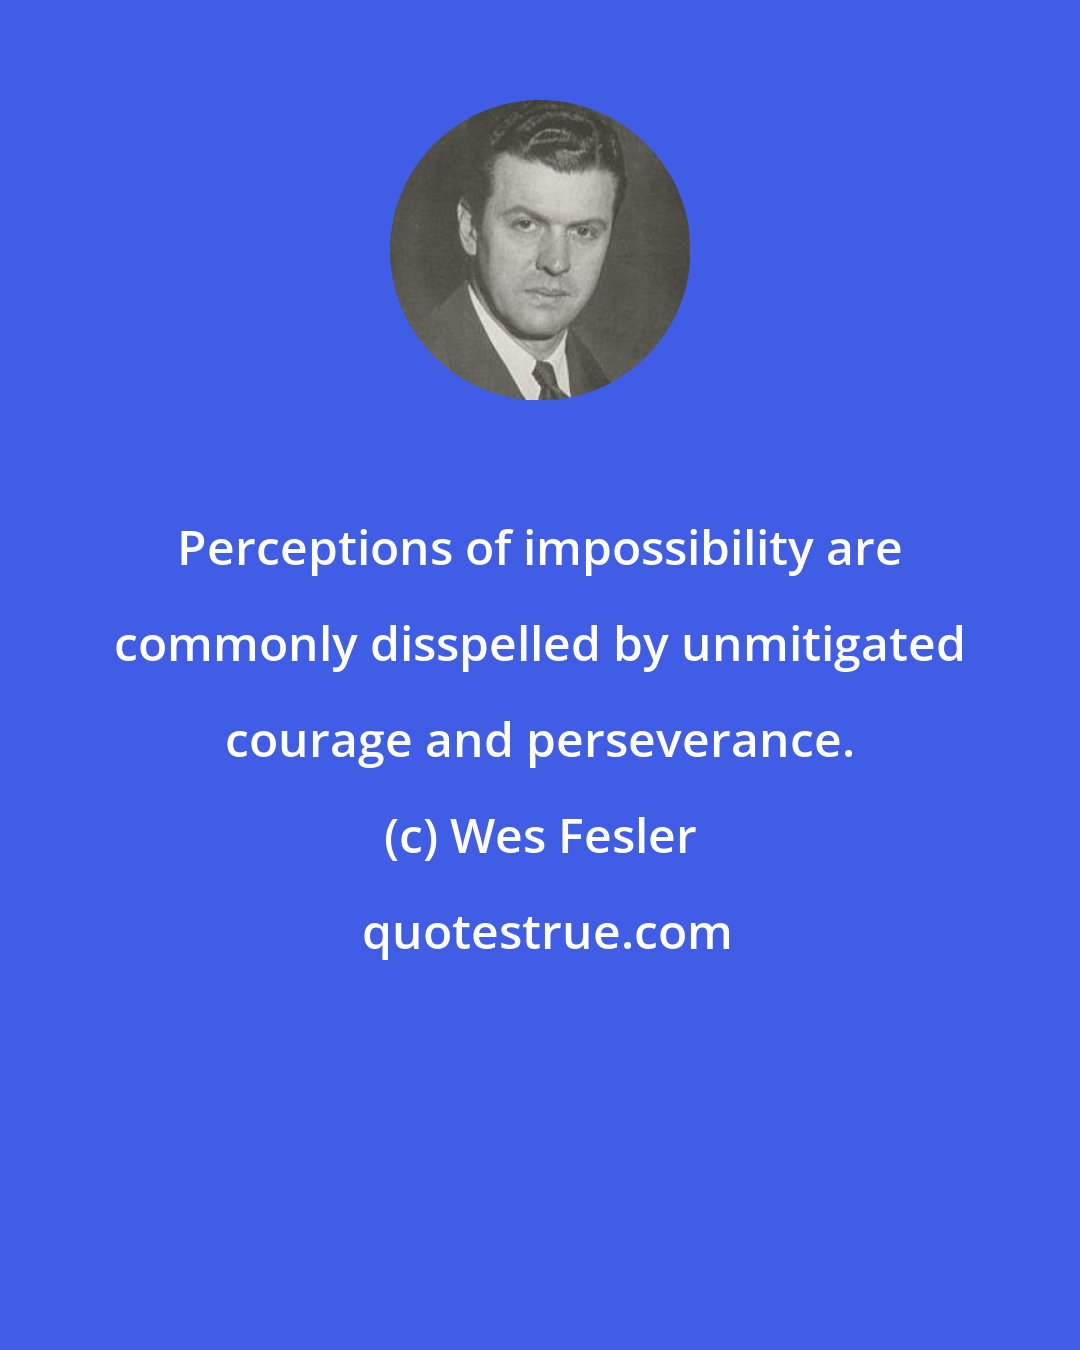 Wes Fesler: Perceptions of impossibility are commonly disspelled by unmitigated courage and perseverance.